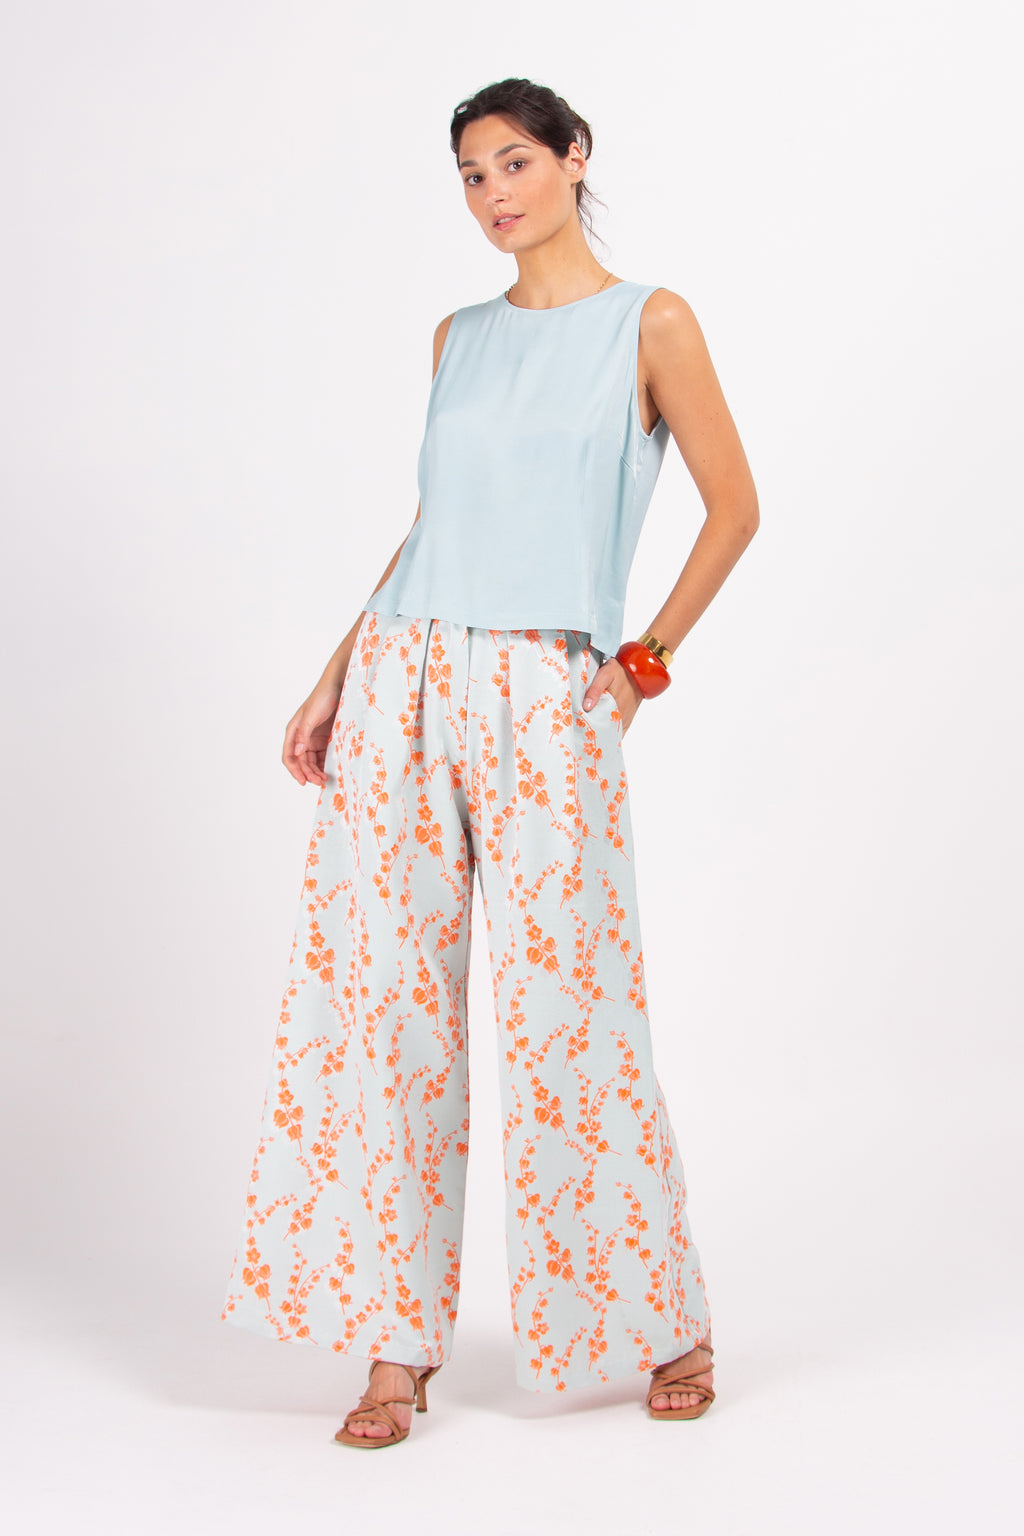 Donny trousers in ice blue flower jacquard